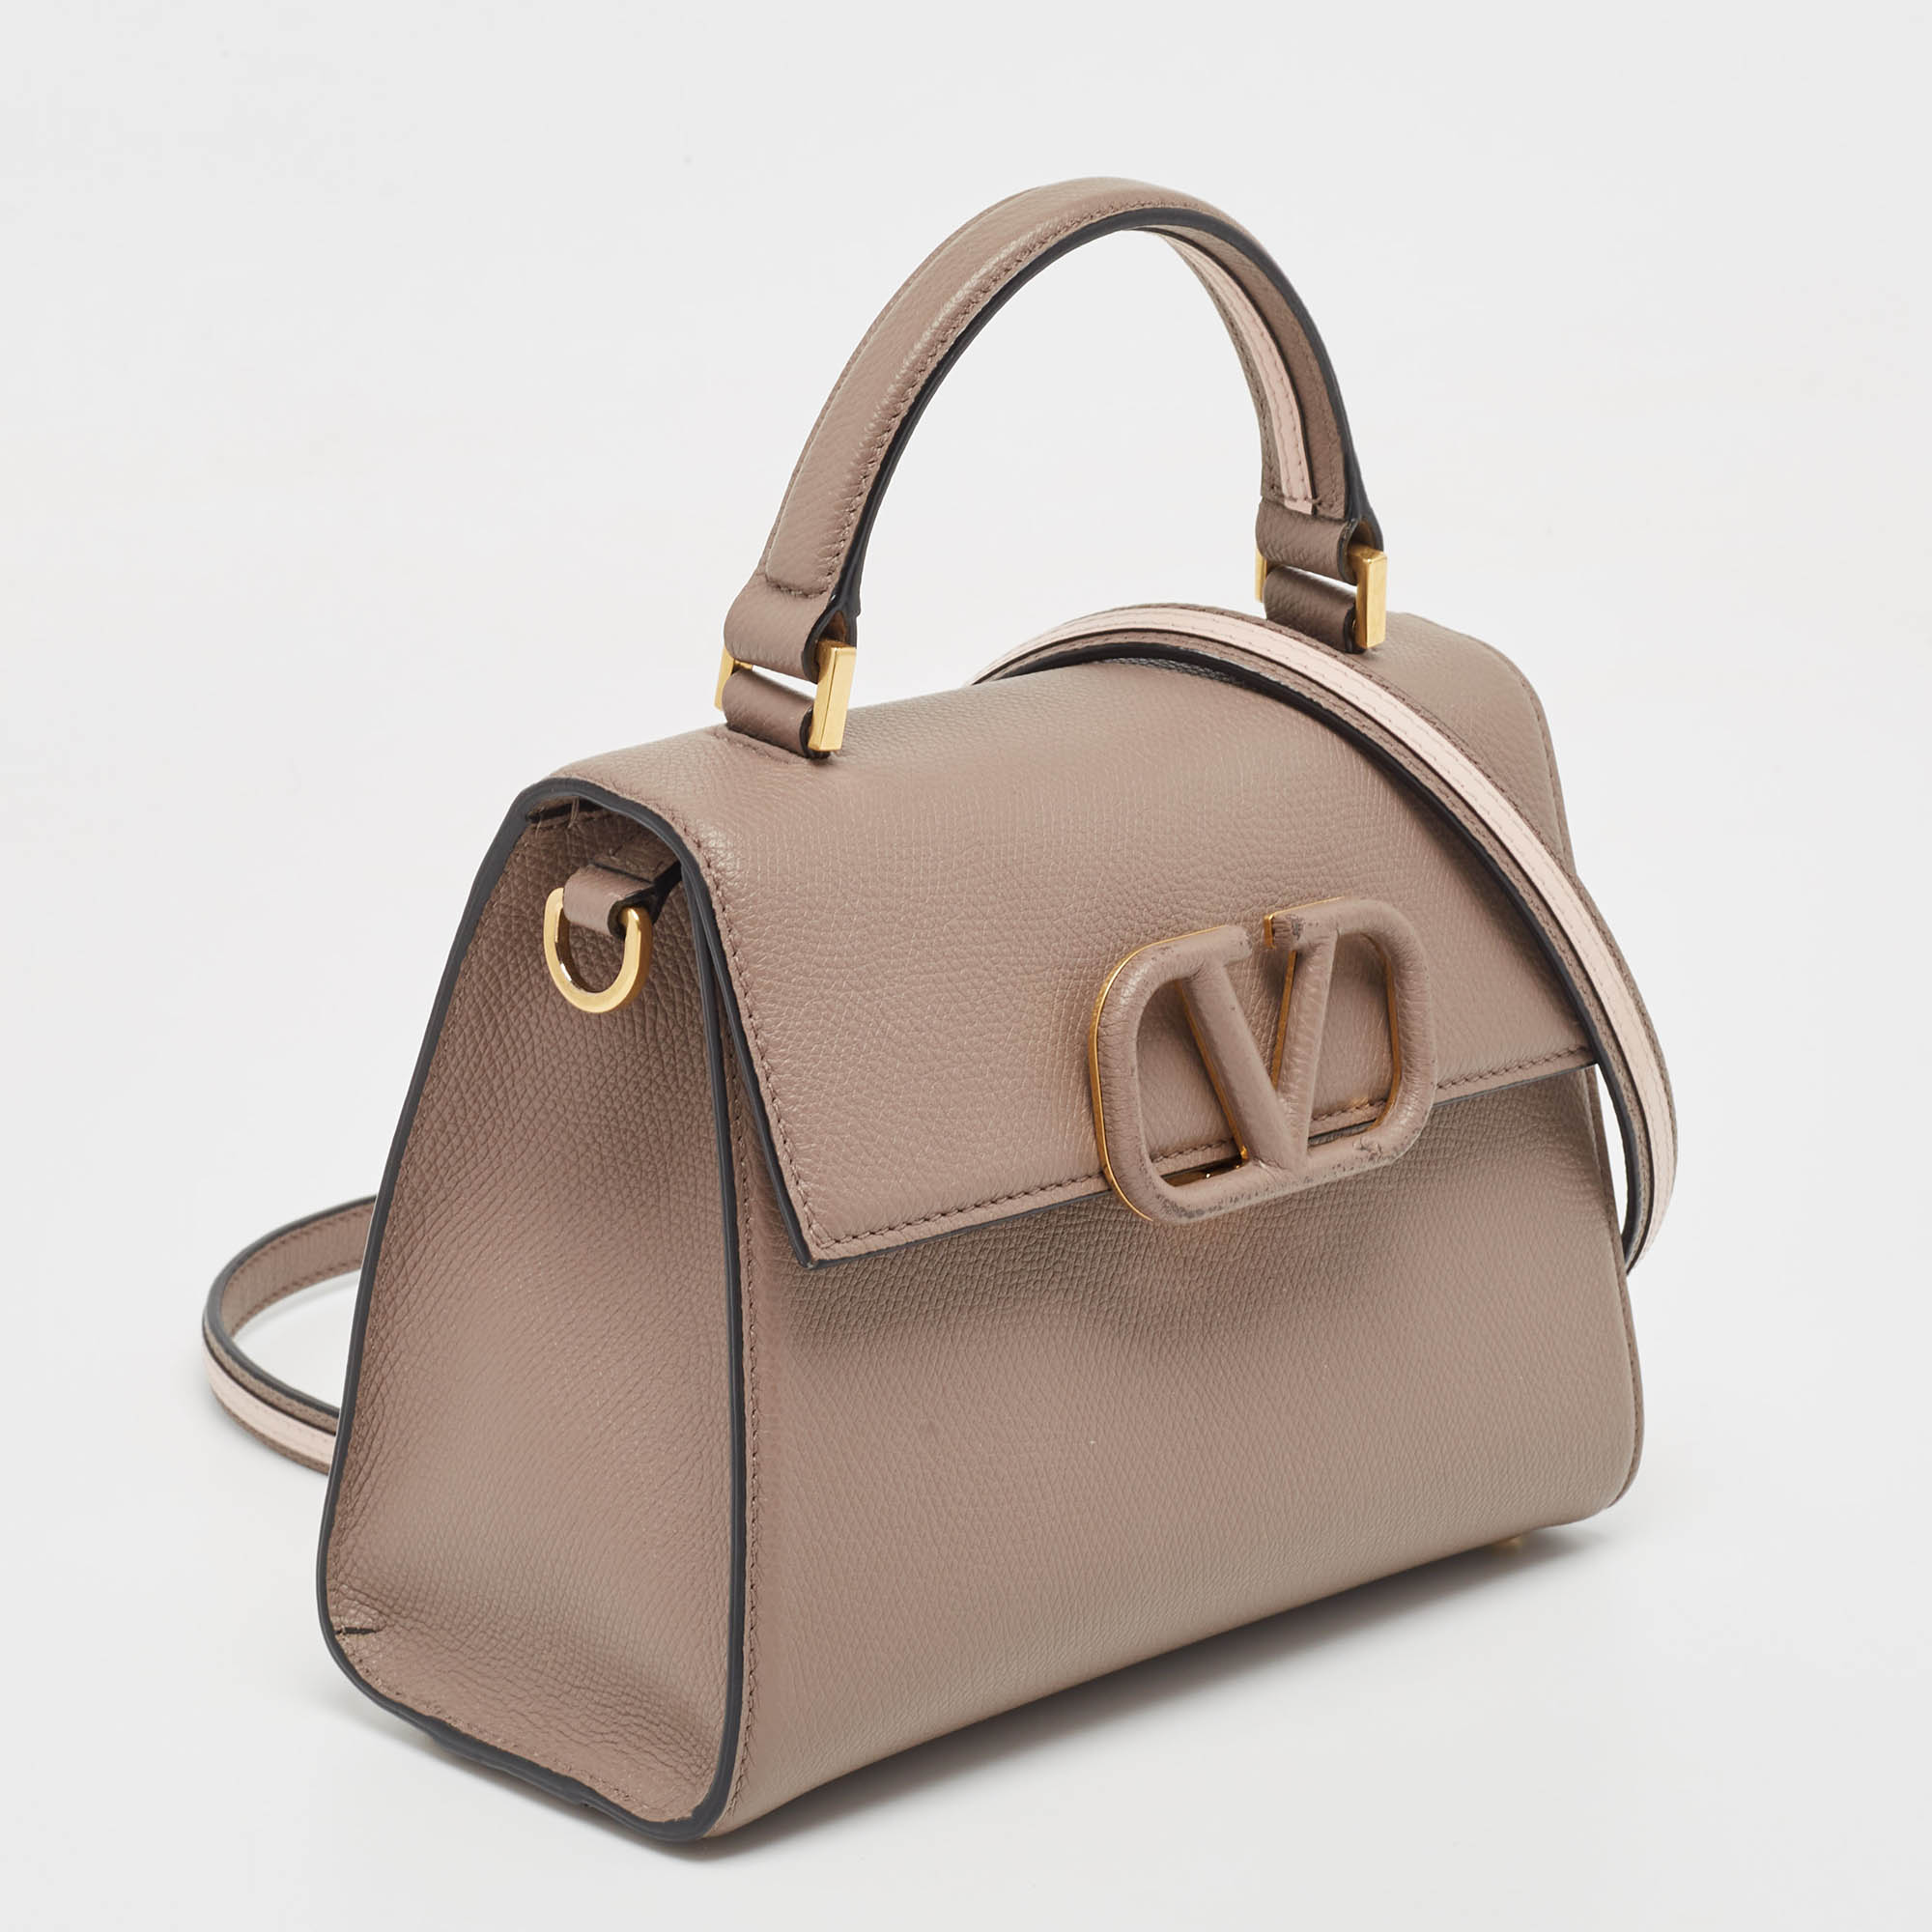 Valentino Beige Leather Small VSling Top Handle Bag